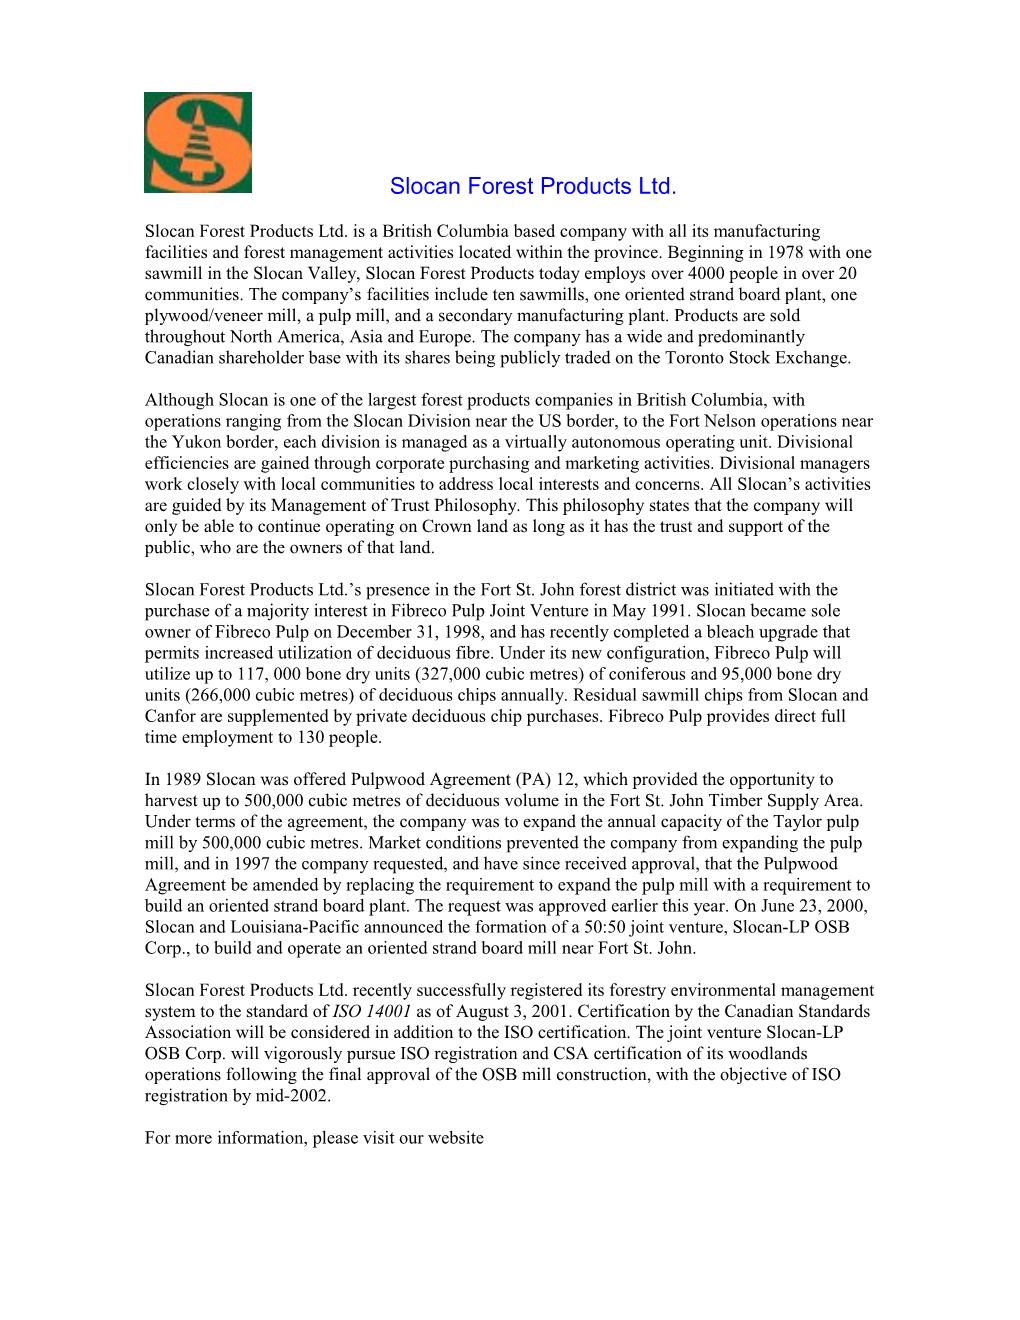 Slocan Forest Products Ltd